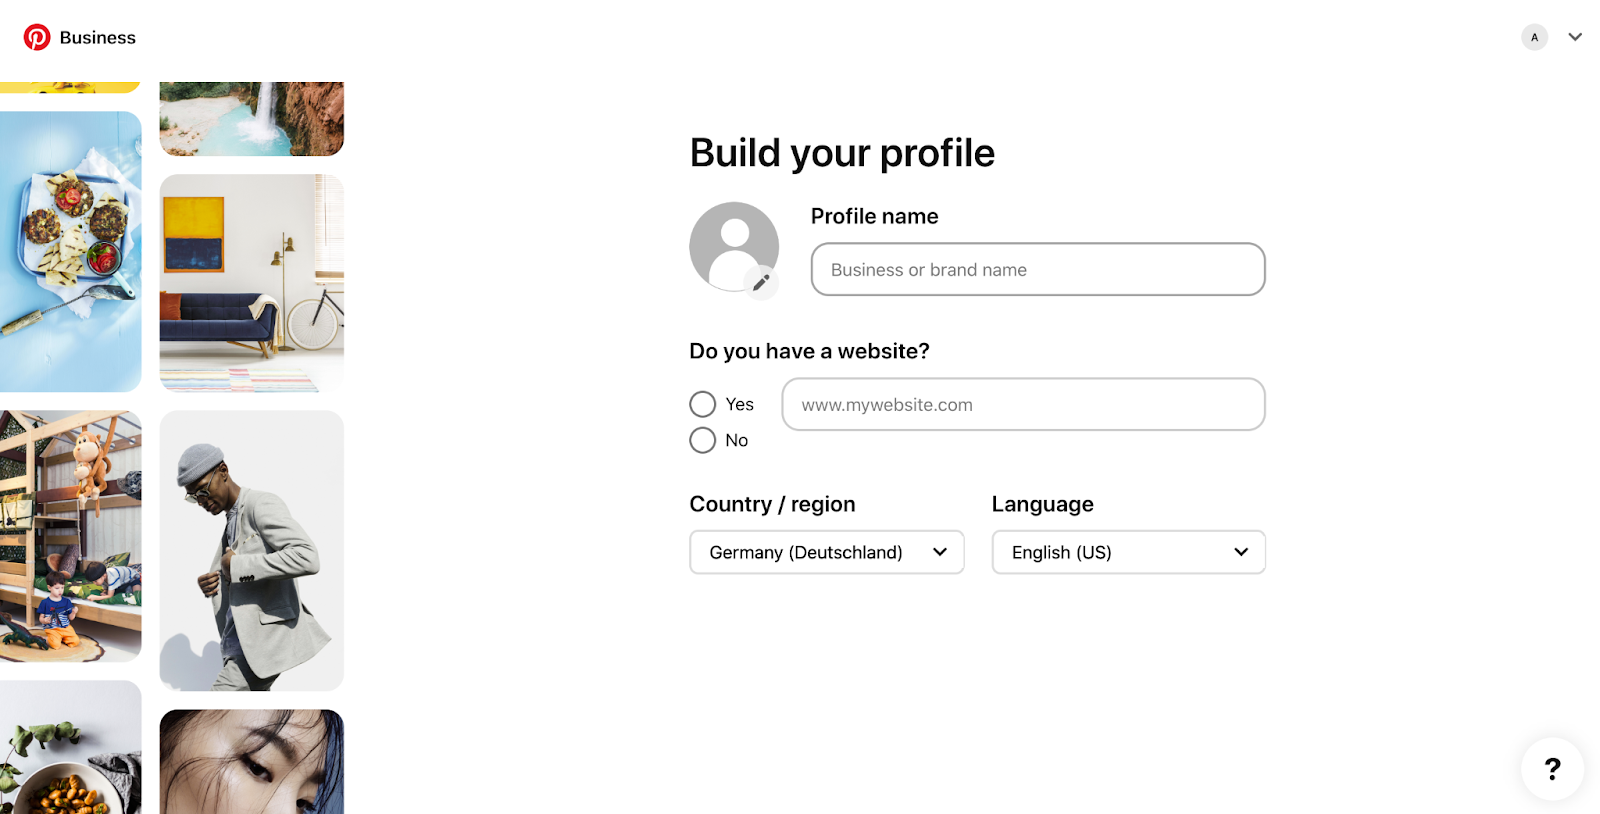 A screenshot of the Pinterest page with the brand questionnaire to create a profile